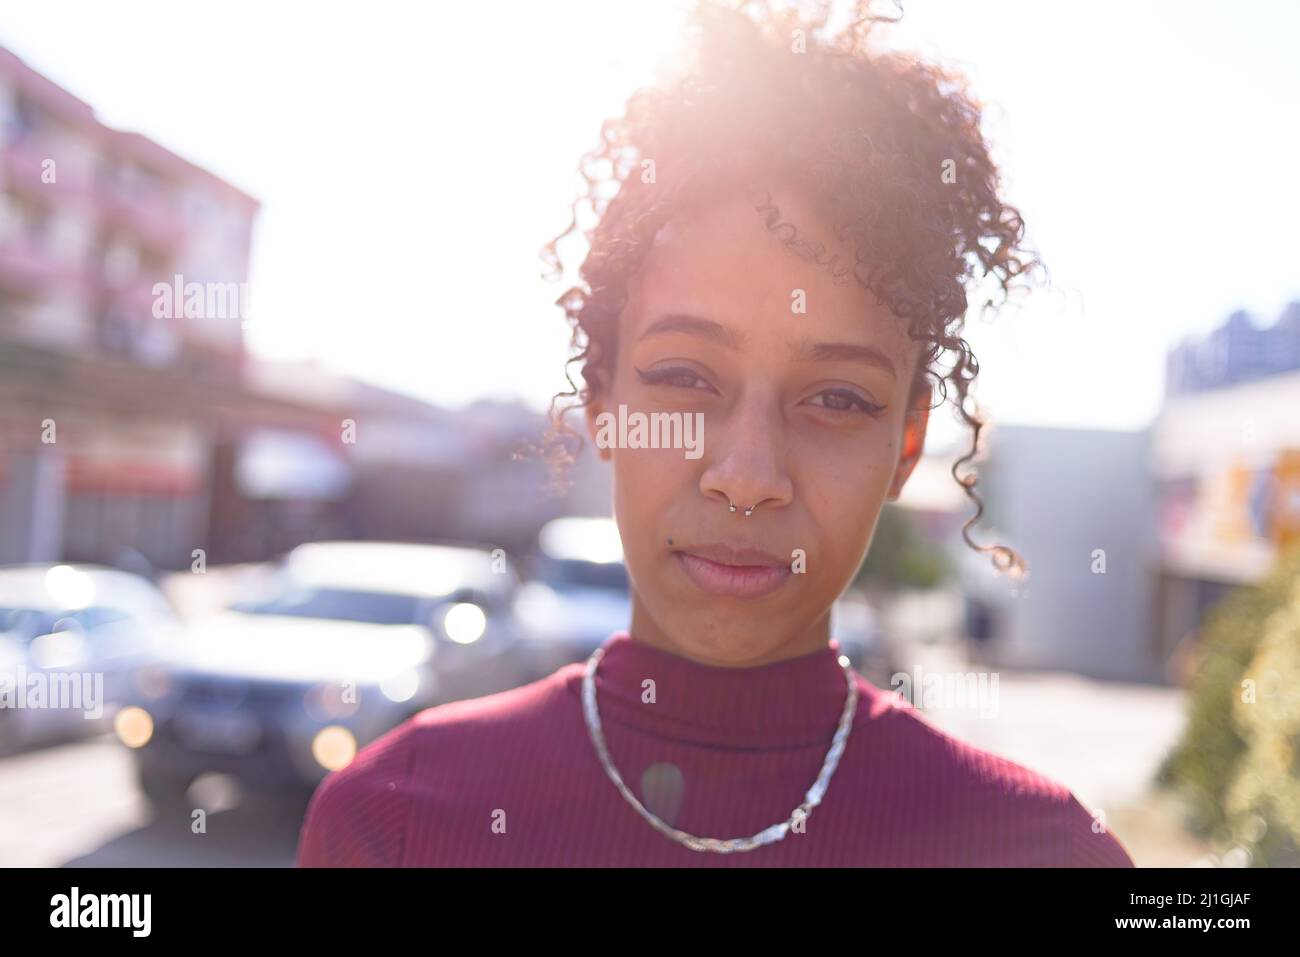 Young black woman portrait outdoors in urban background Stock Photo